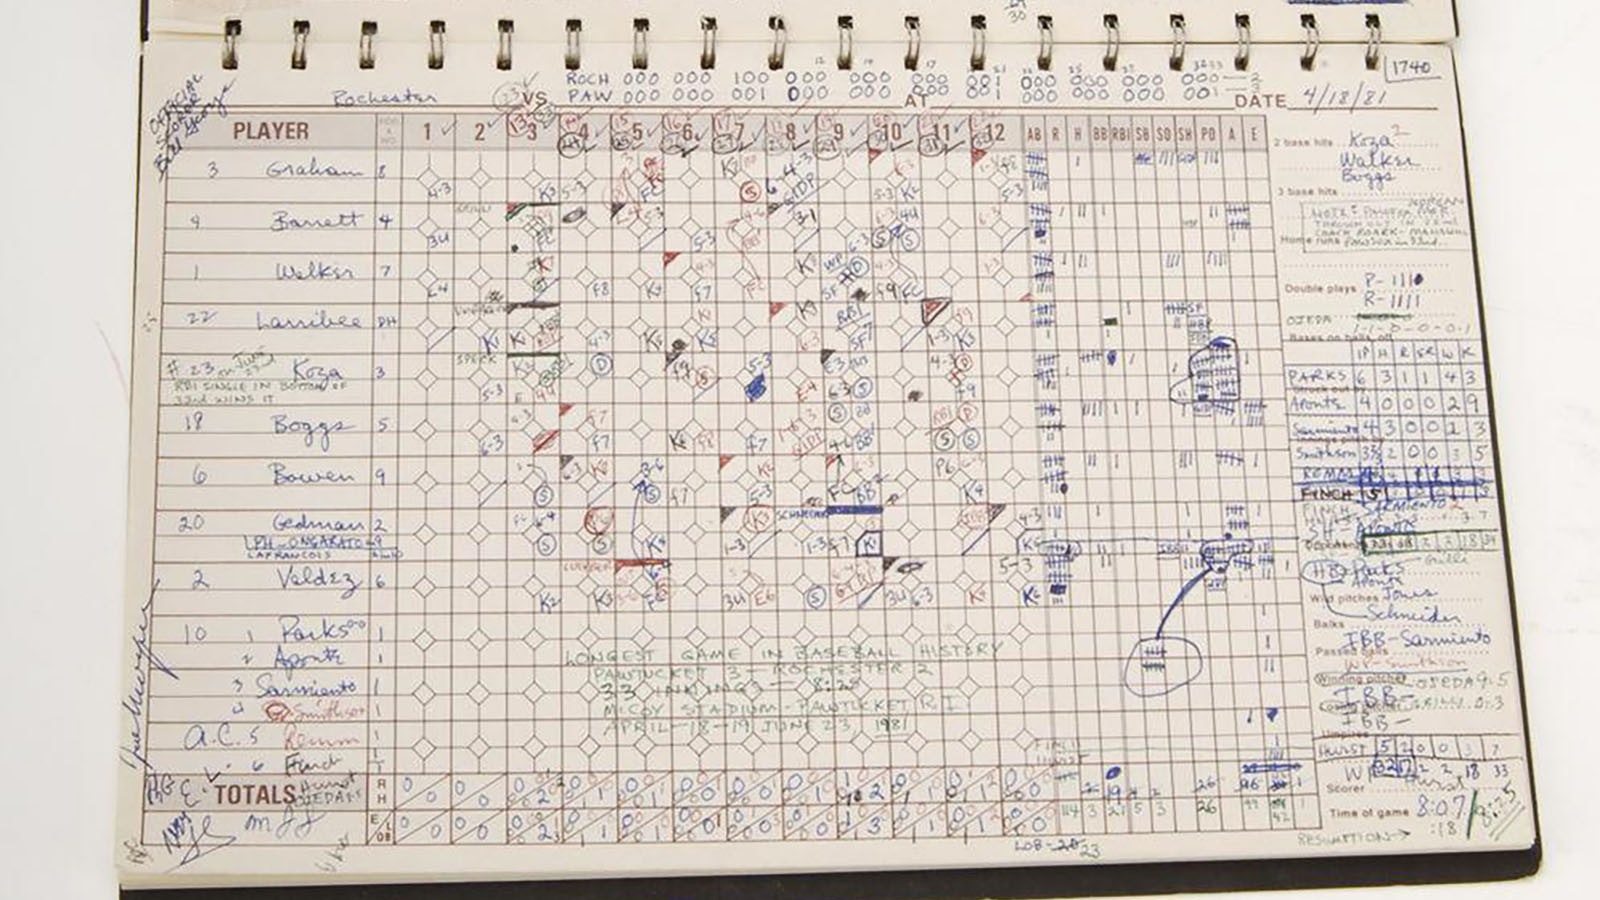 Second half of the official scoresheet from the longest game in professional baseball history.